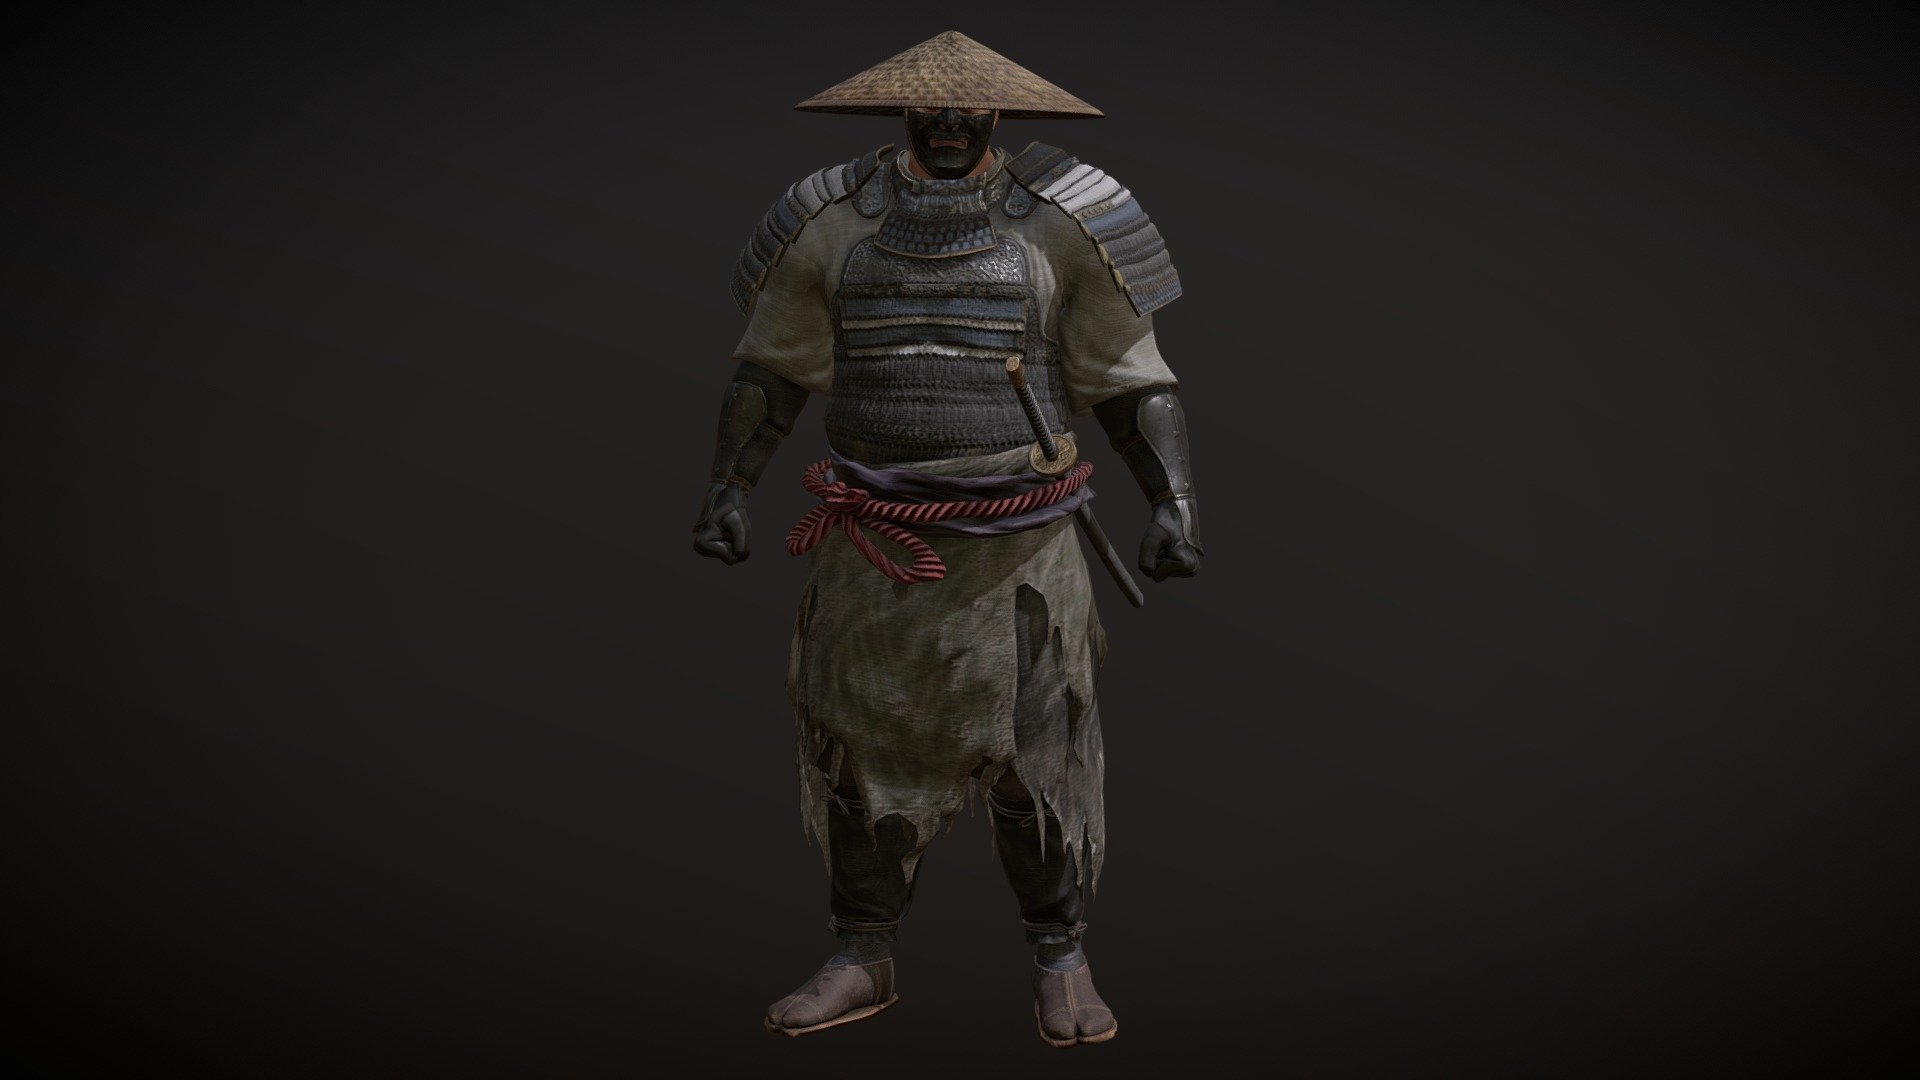 Samurai Warrior:
Complete archive in additional file

Character in A-pose ( Game Version)




High details.

Highres unique textures.

Rigged.

Exported to Unreal ( migrate files). Use same standard unreal mannequin skeleton. Can handle the same animations as Unreal mannequin from marketplace.

Highres Texturesets.

Professional Uv Layout.

Character mesh.

3d Game Ready Samurai Warrior Character.

High detail and realistic model.

Rigged, with high definition textures.

Texture types:




Albedo (Diffuse).

Normal.

Roughness.

Metallness.

ORM(Unreal Engine).
 - Samurai Character PBR Game Ready - Buy Royalty Free 3D model by lidiom4ri4 3d model